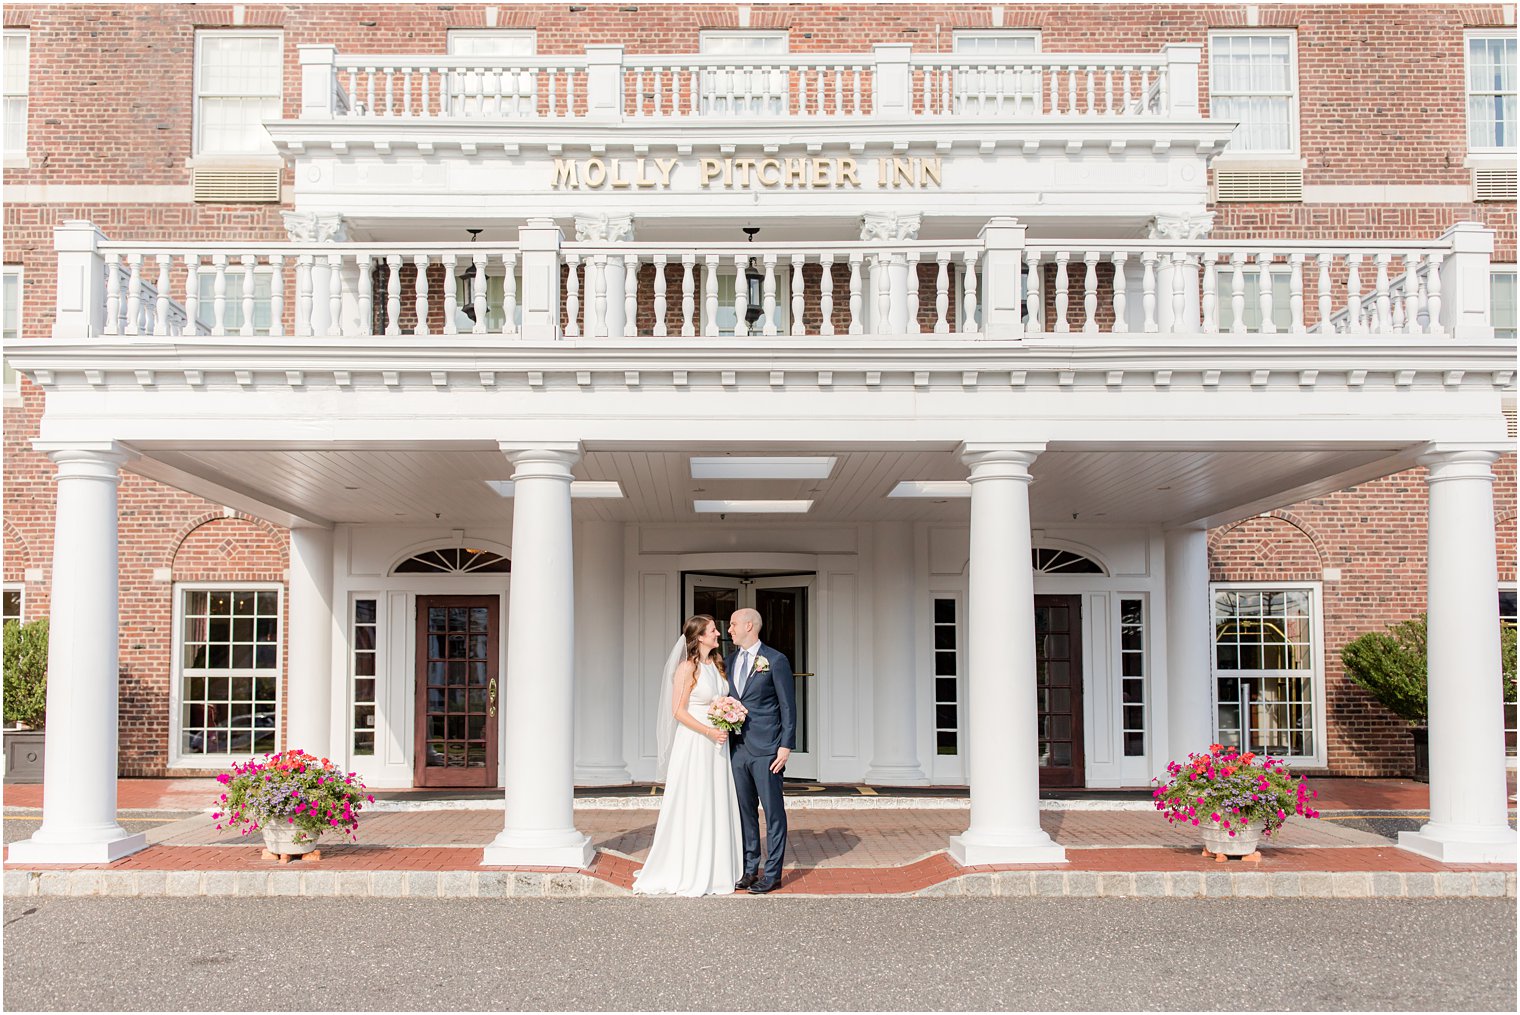 Molly Pitcher Inn wedding portraits of bride and groom 